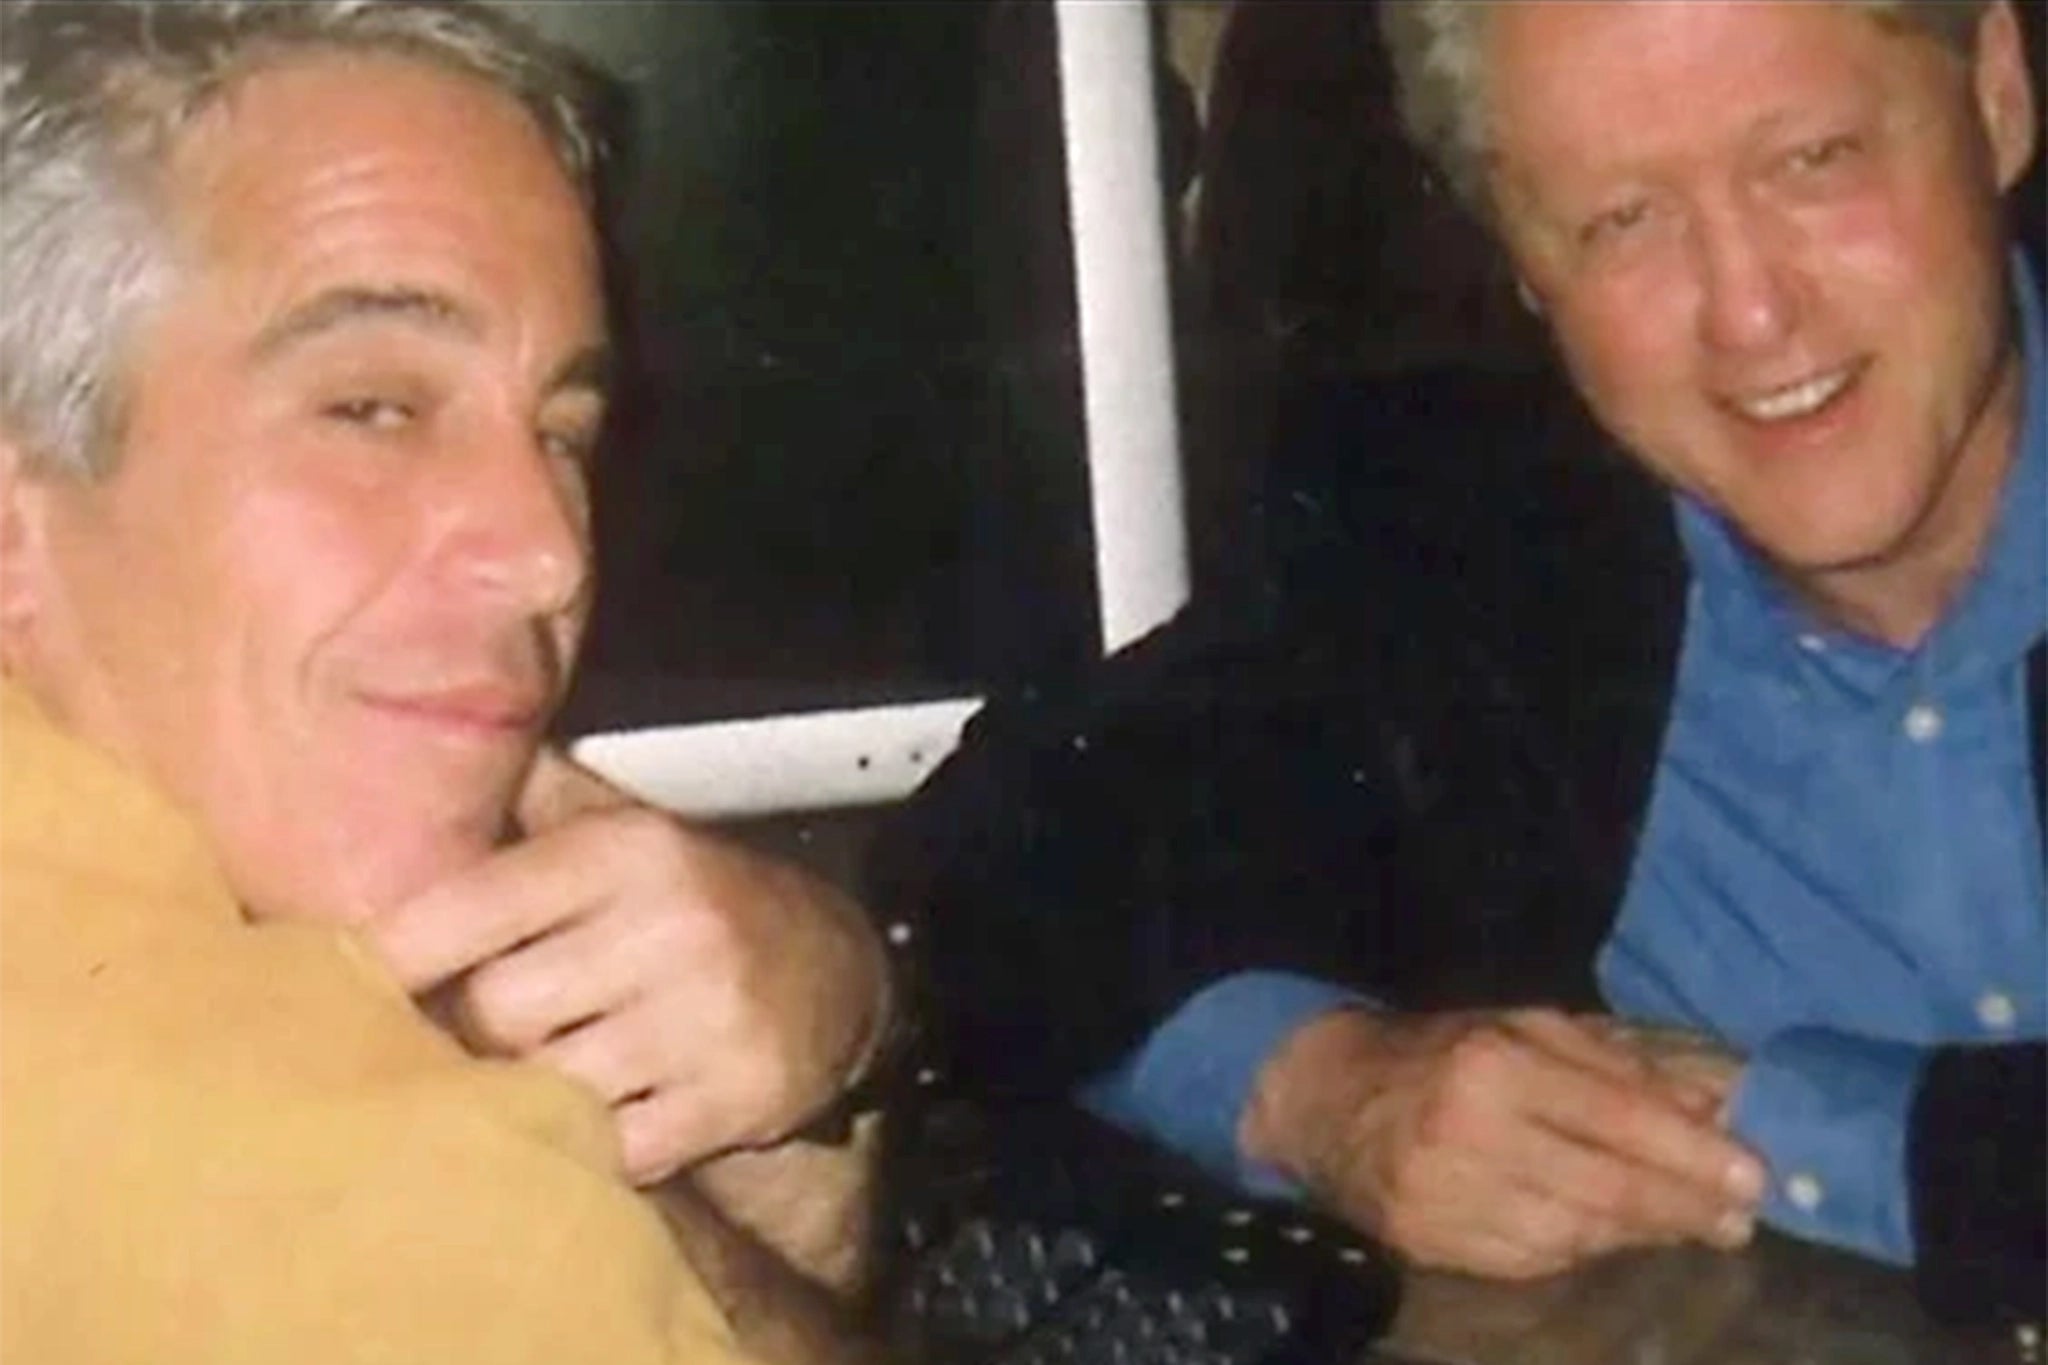 Jeffrey Epstein and the former US president Bill Clinton